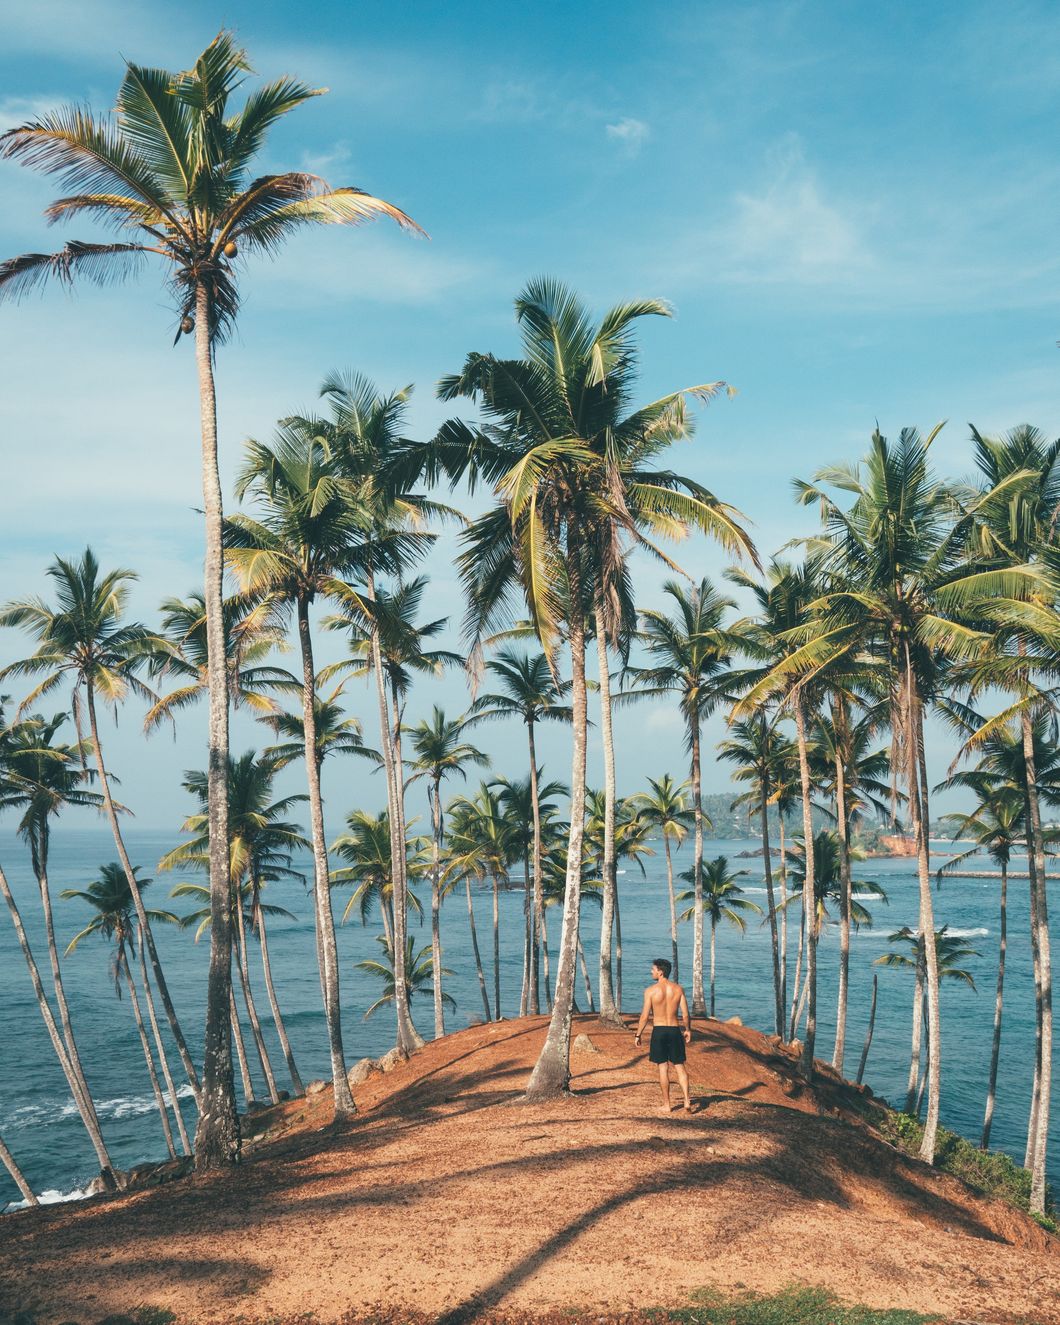 https://www.pexels.com/photo/person-standing-on-dirt-surrounded-by-coconut-trees-1005417/